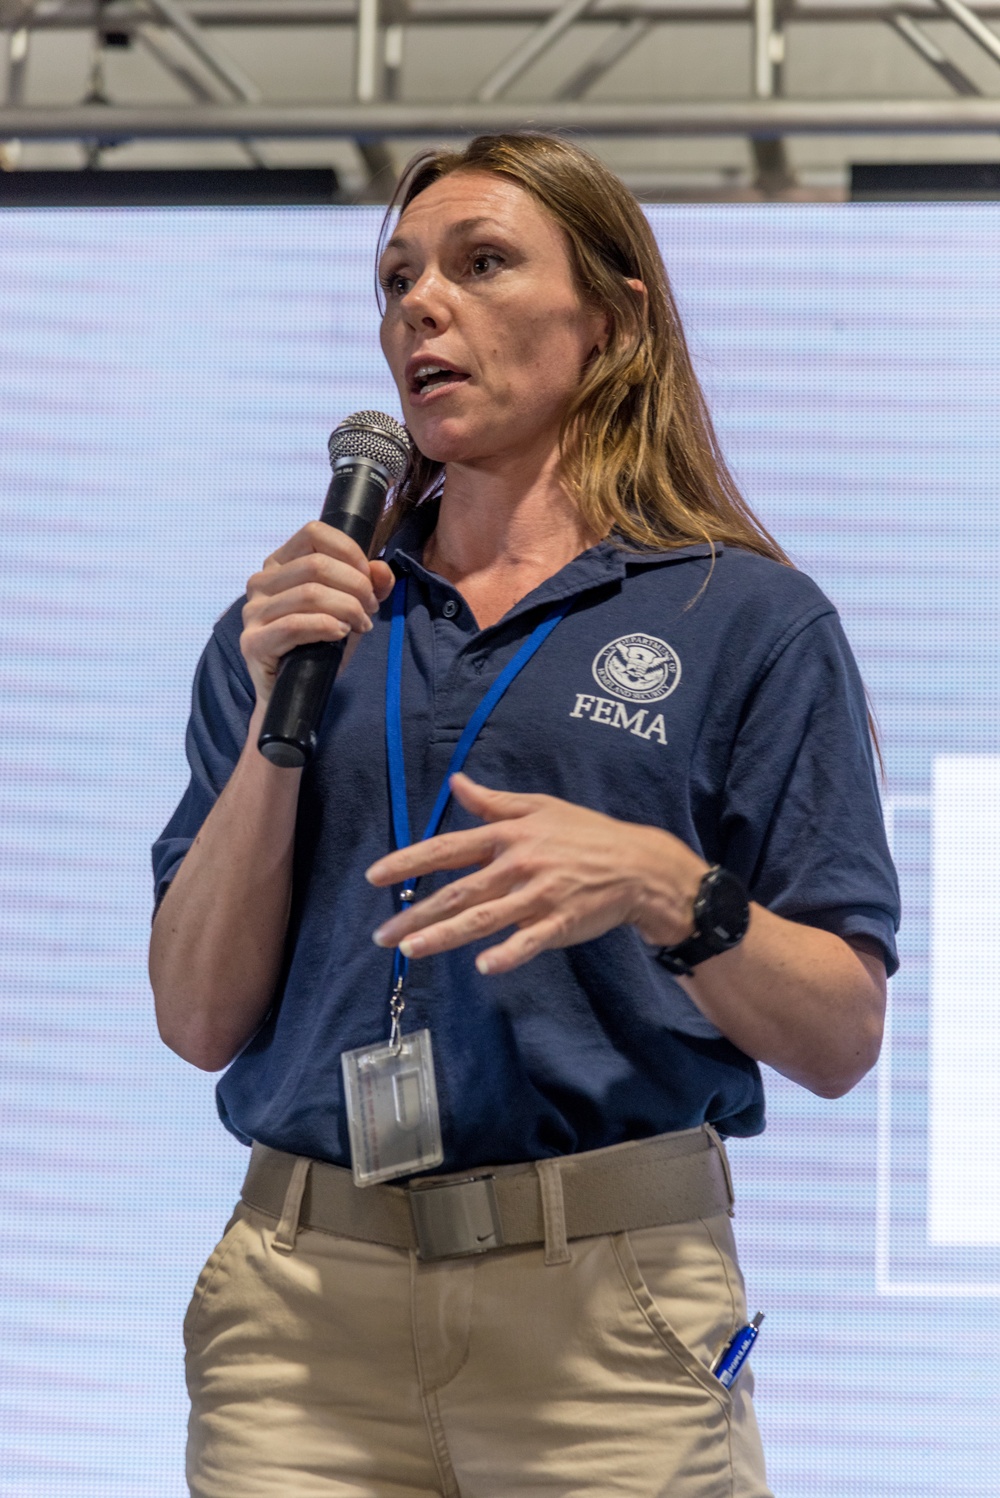 FEMA Speaks at Business Conference Following Quake